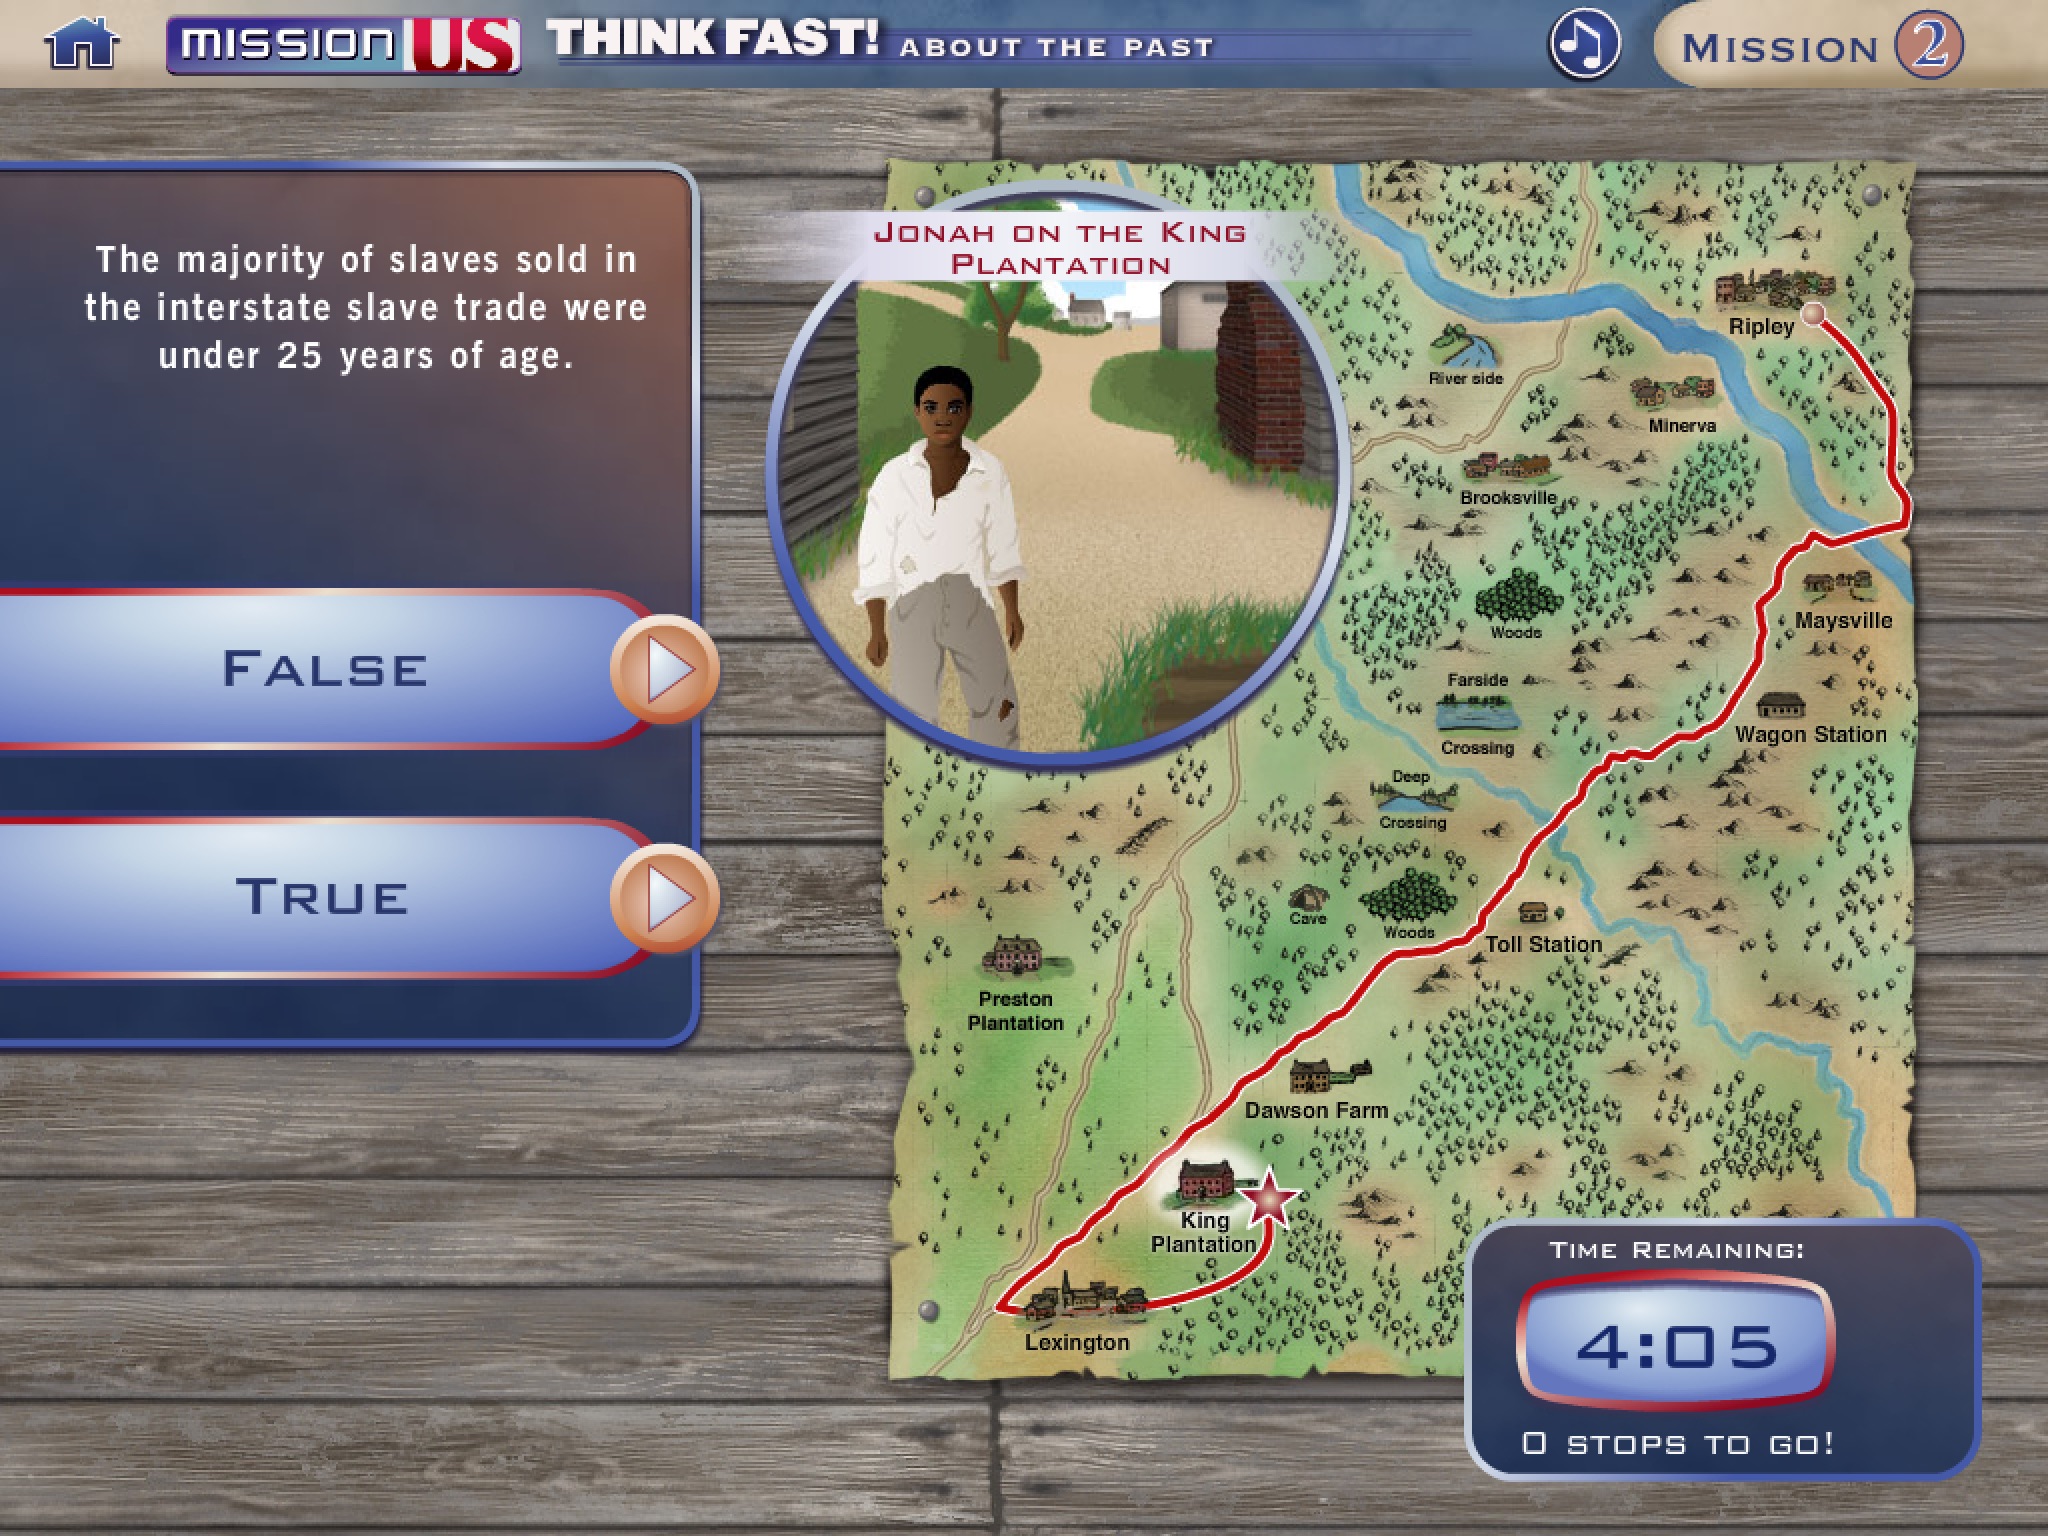 Mission US: Think Fast! About the Past screenshot 3